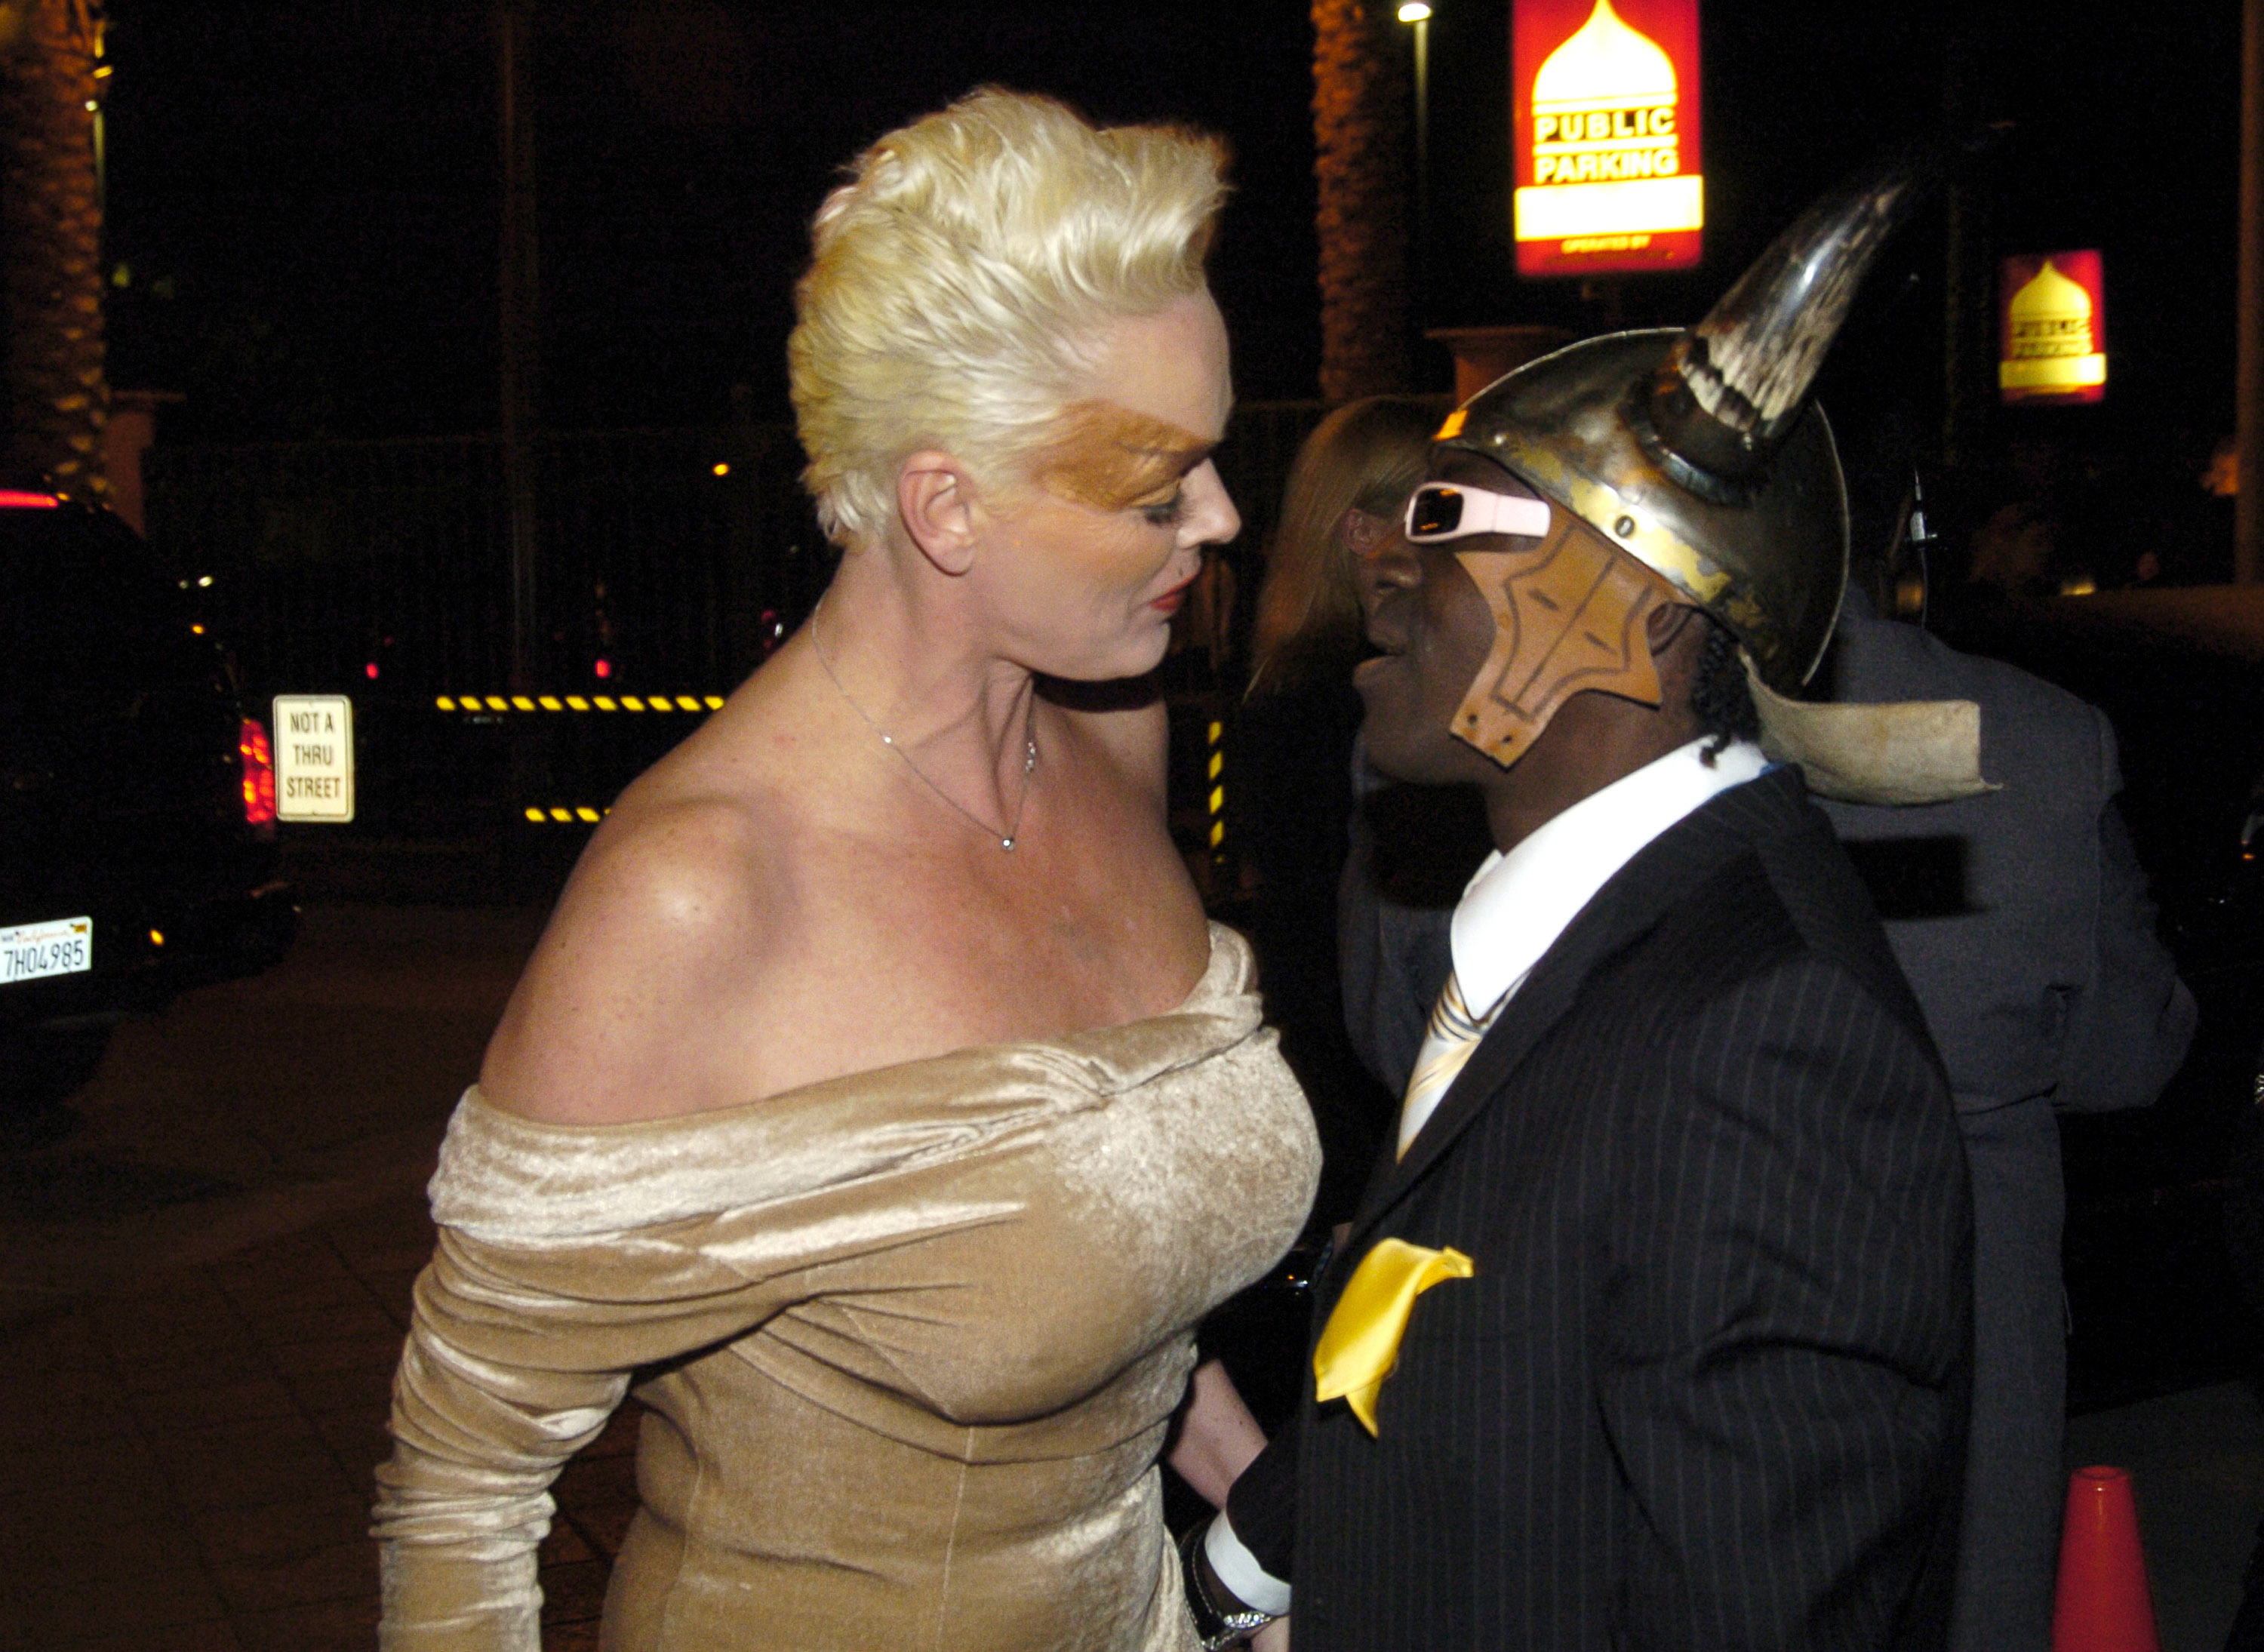 Brigitte in an off-shoulder dress looking at Flavor Flav, in a suit with a unique helmet